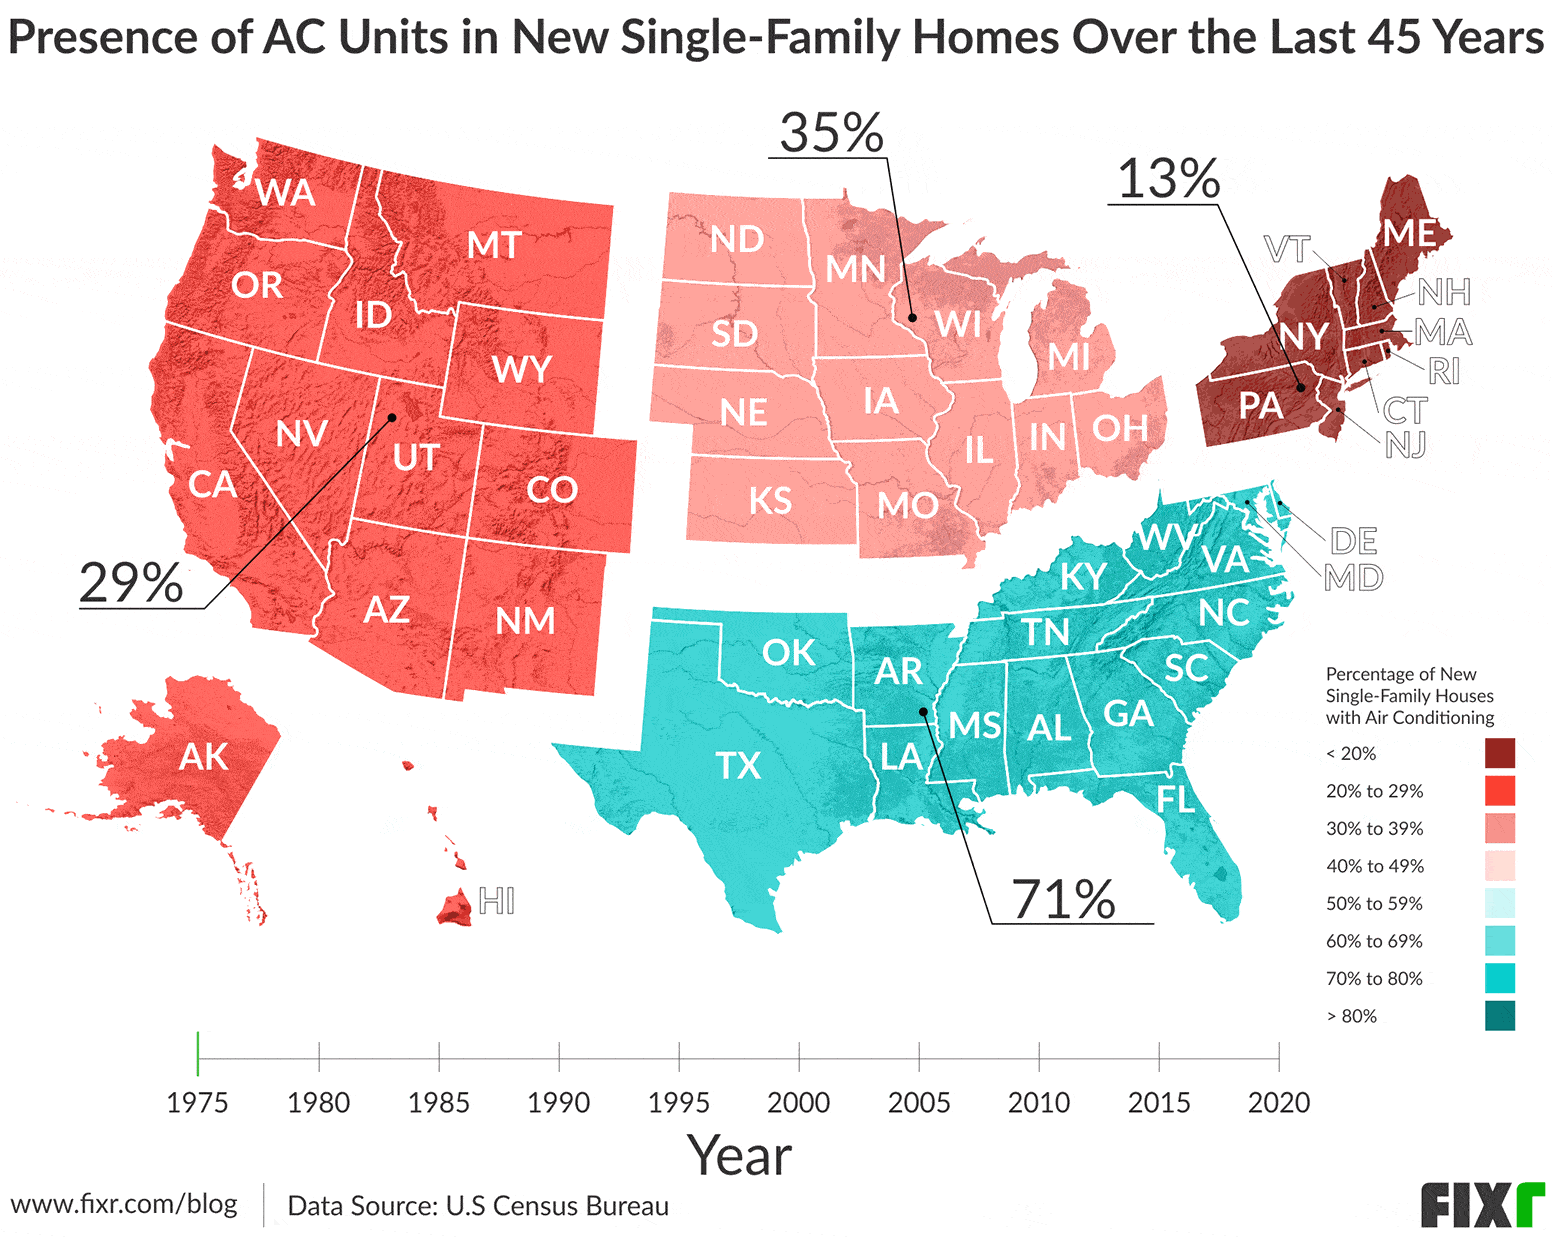 Presence of Residential AC in Single Family Homes Over Last 45 Years